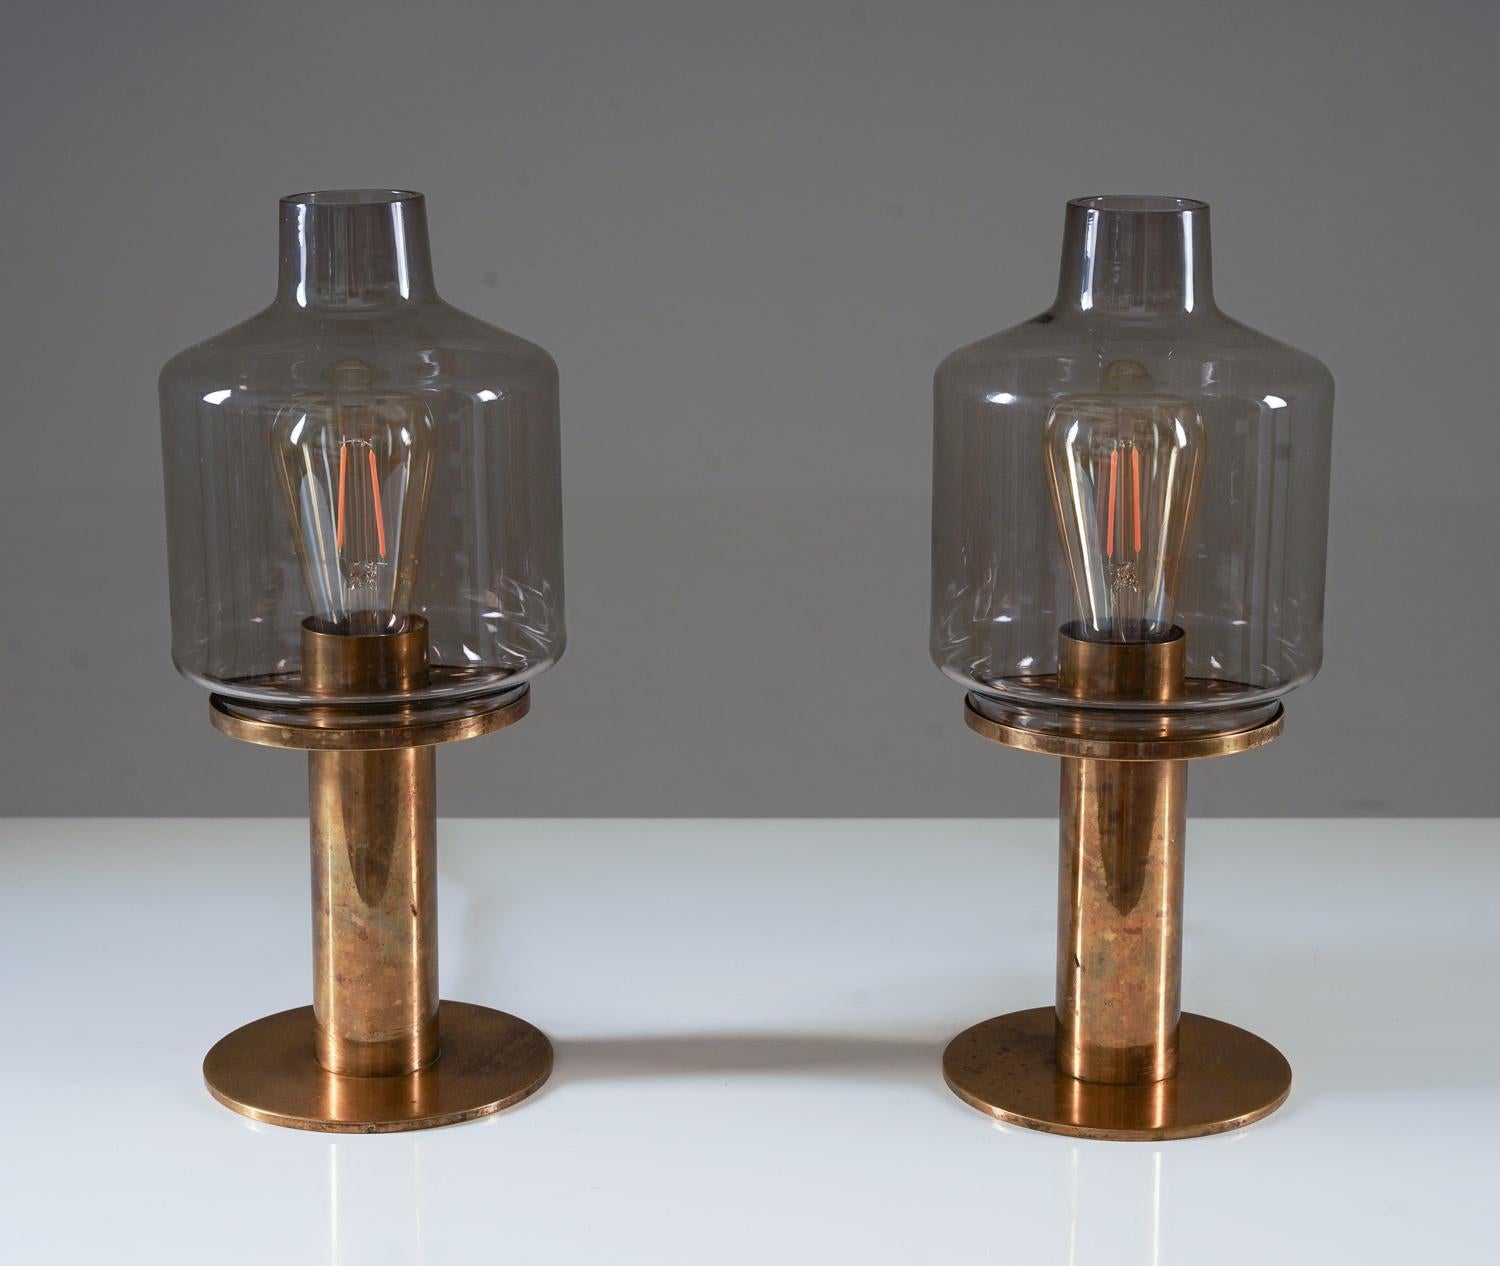 A pair of magnificent table lamps by Hans-Agne Jakobsson for Hans-Agne Jakobsson, Markaryd, Sweden.
The lamps consist of a heavy brass base, holding the smoke-coloured shades.

Condition: The lamps are good condition, with patina on the brass;